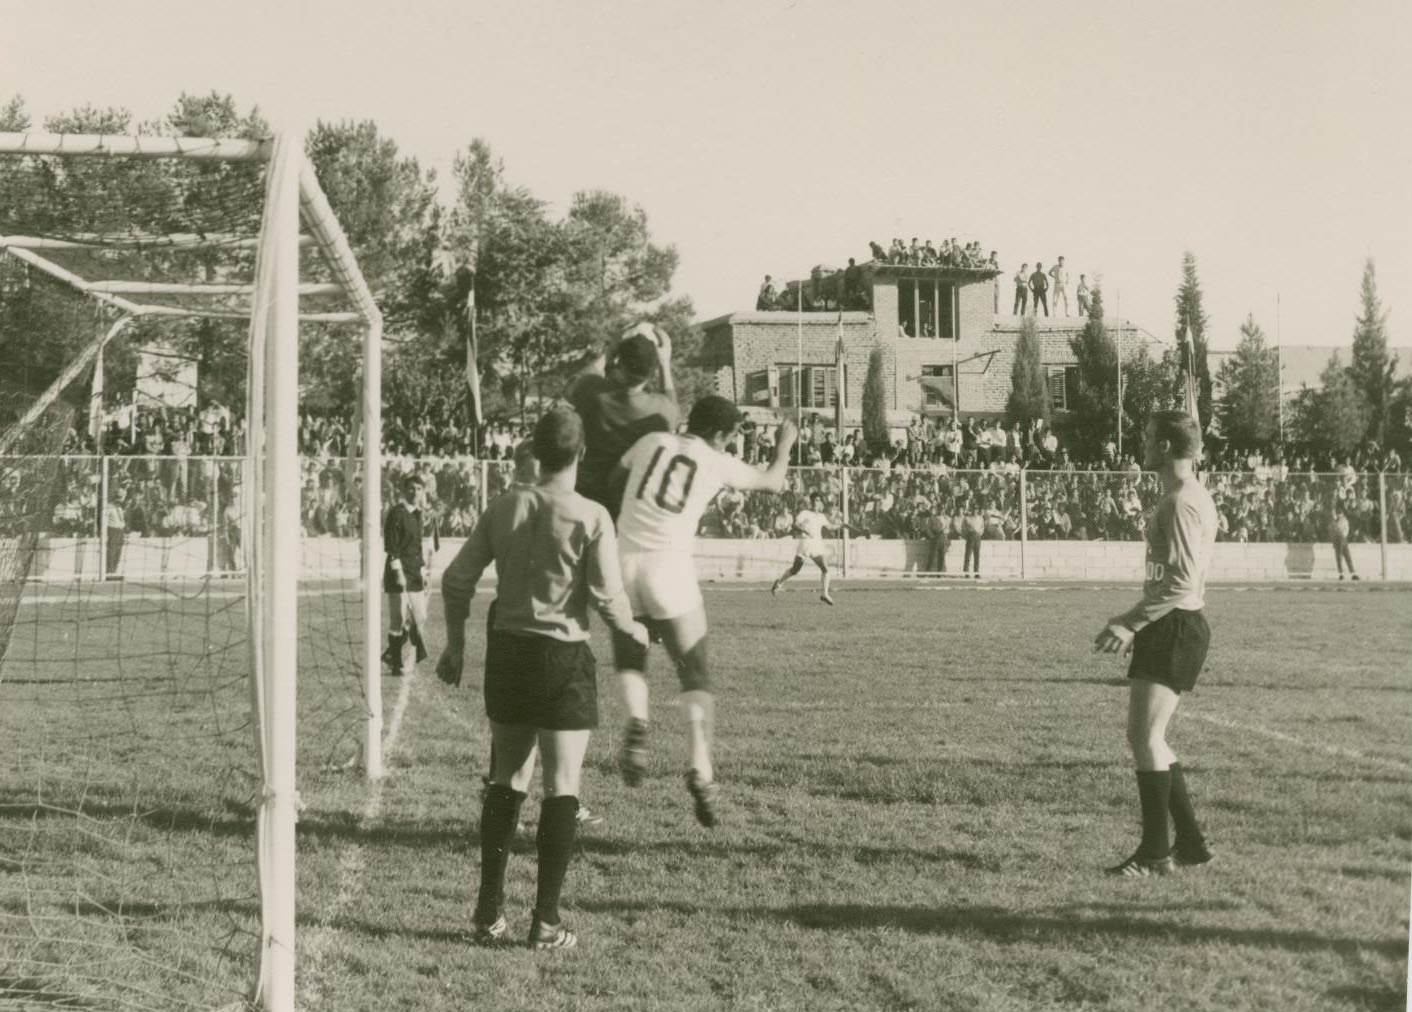 A soccer game between the Dallas Tornado Soccer Club and an Iranian team during the club's tour in Shiraz, 1967